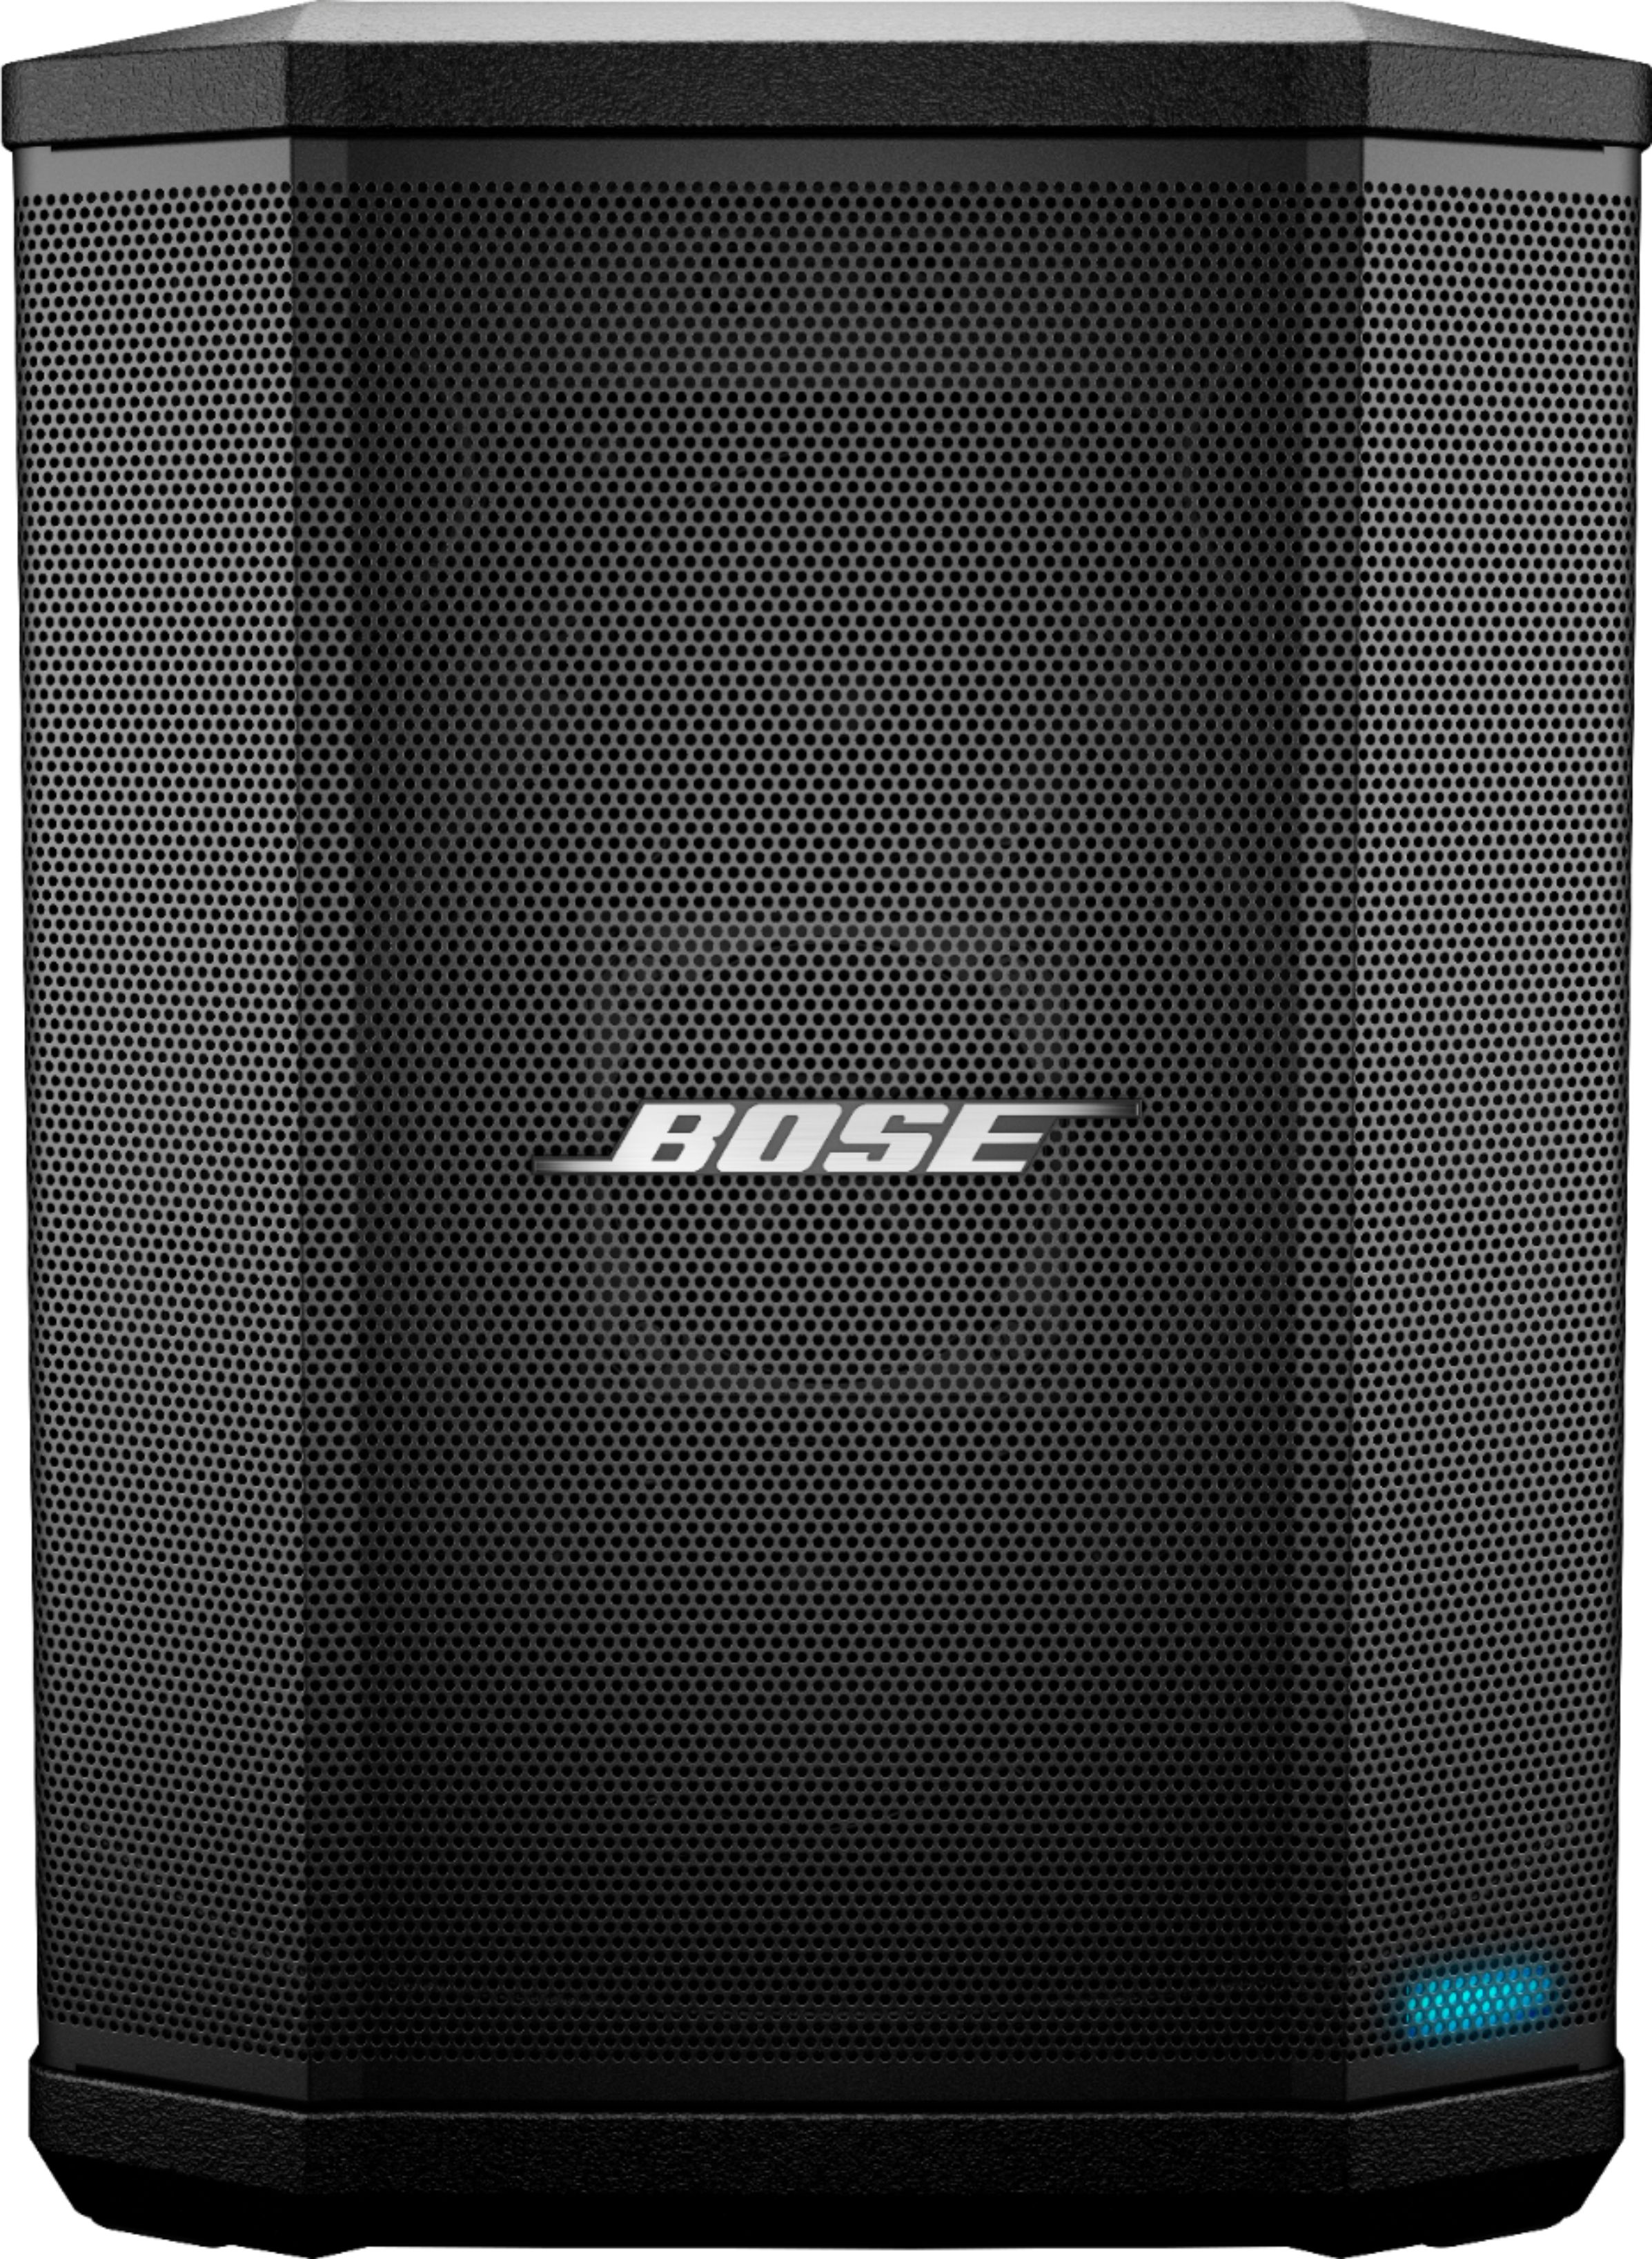 How to Turn On Your Bose Speaker? 23